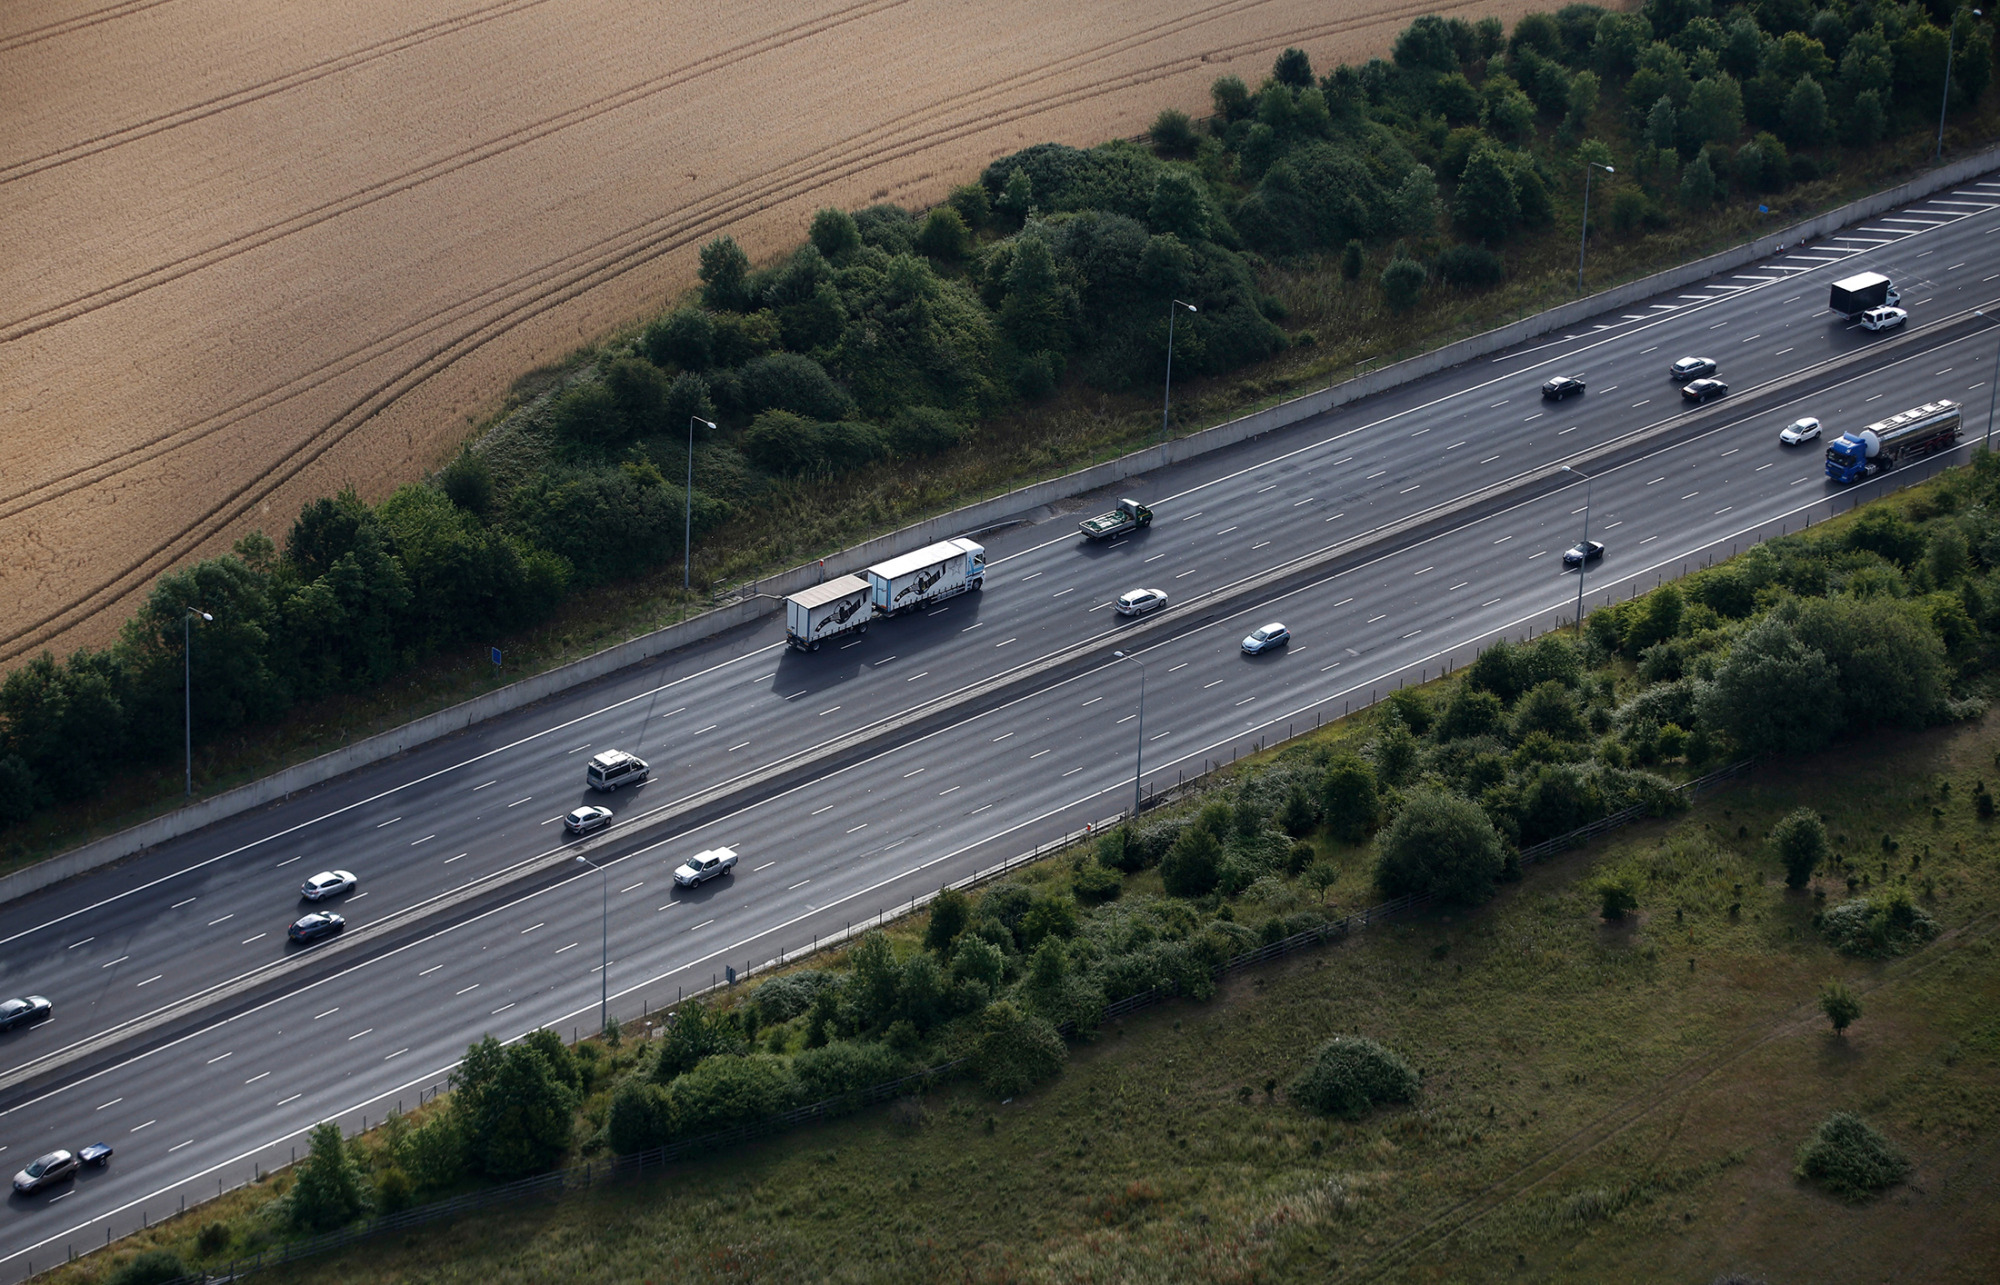 Traffic travels along the M25 motorway in this aerial photograph taken near Upminster, U.K., on Wednesday, July 22, 2015. Passenger journeys on the U.K. rail network rose more than 4 percent to a record 1.65 billion in the fiscal year through March as the country's crowded roads encouraged people to continue an exodus from cars to trains.
